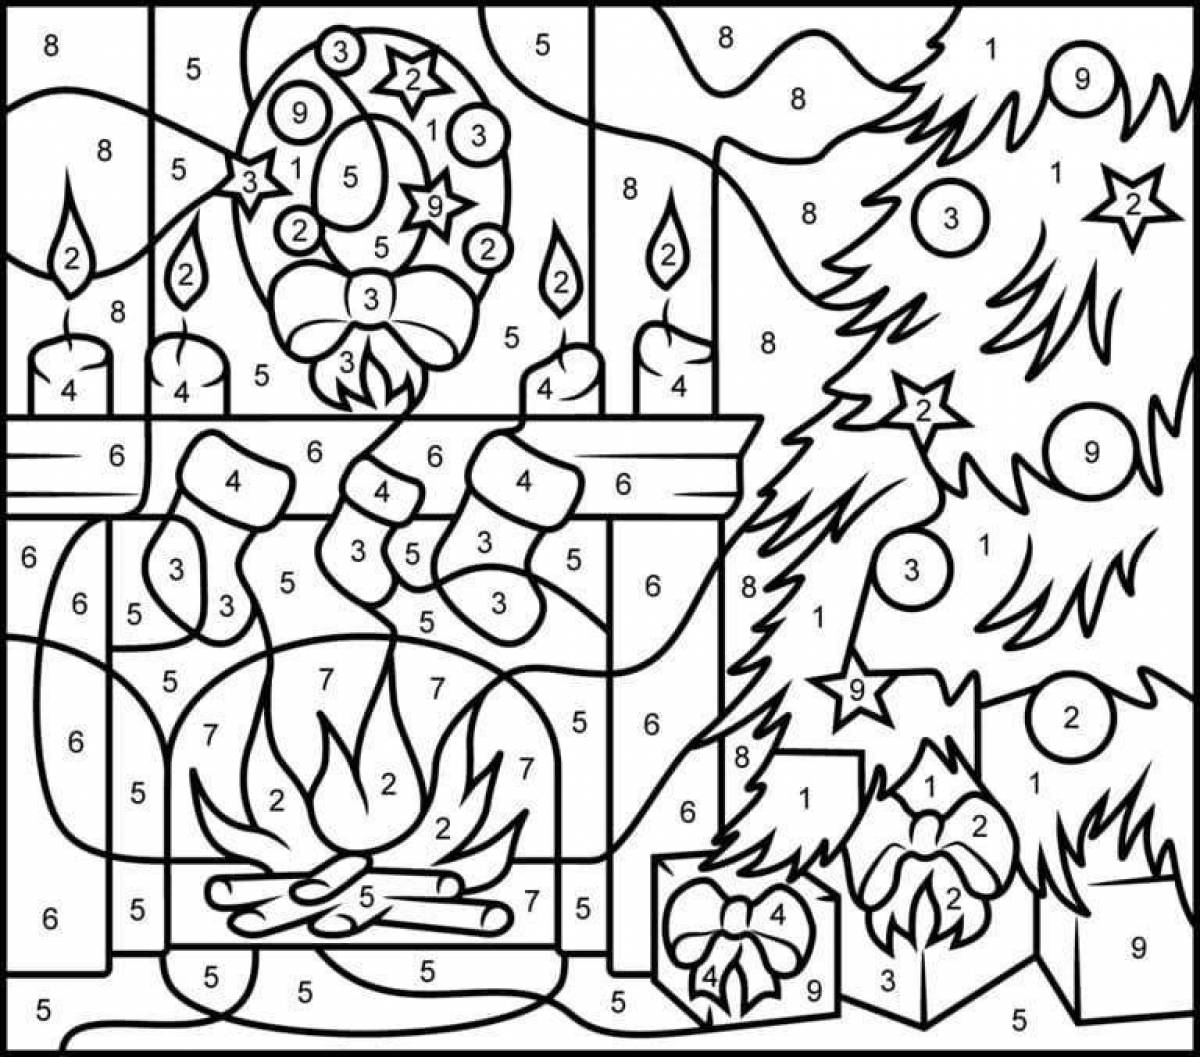 Colorful Christmas coloring game with lights